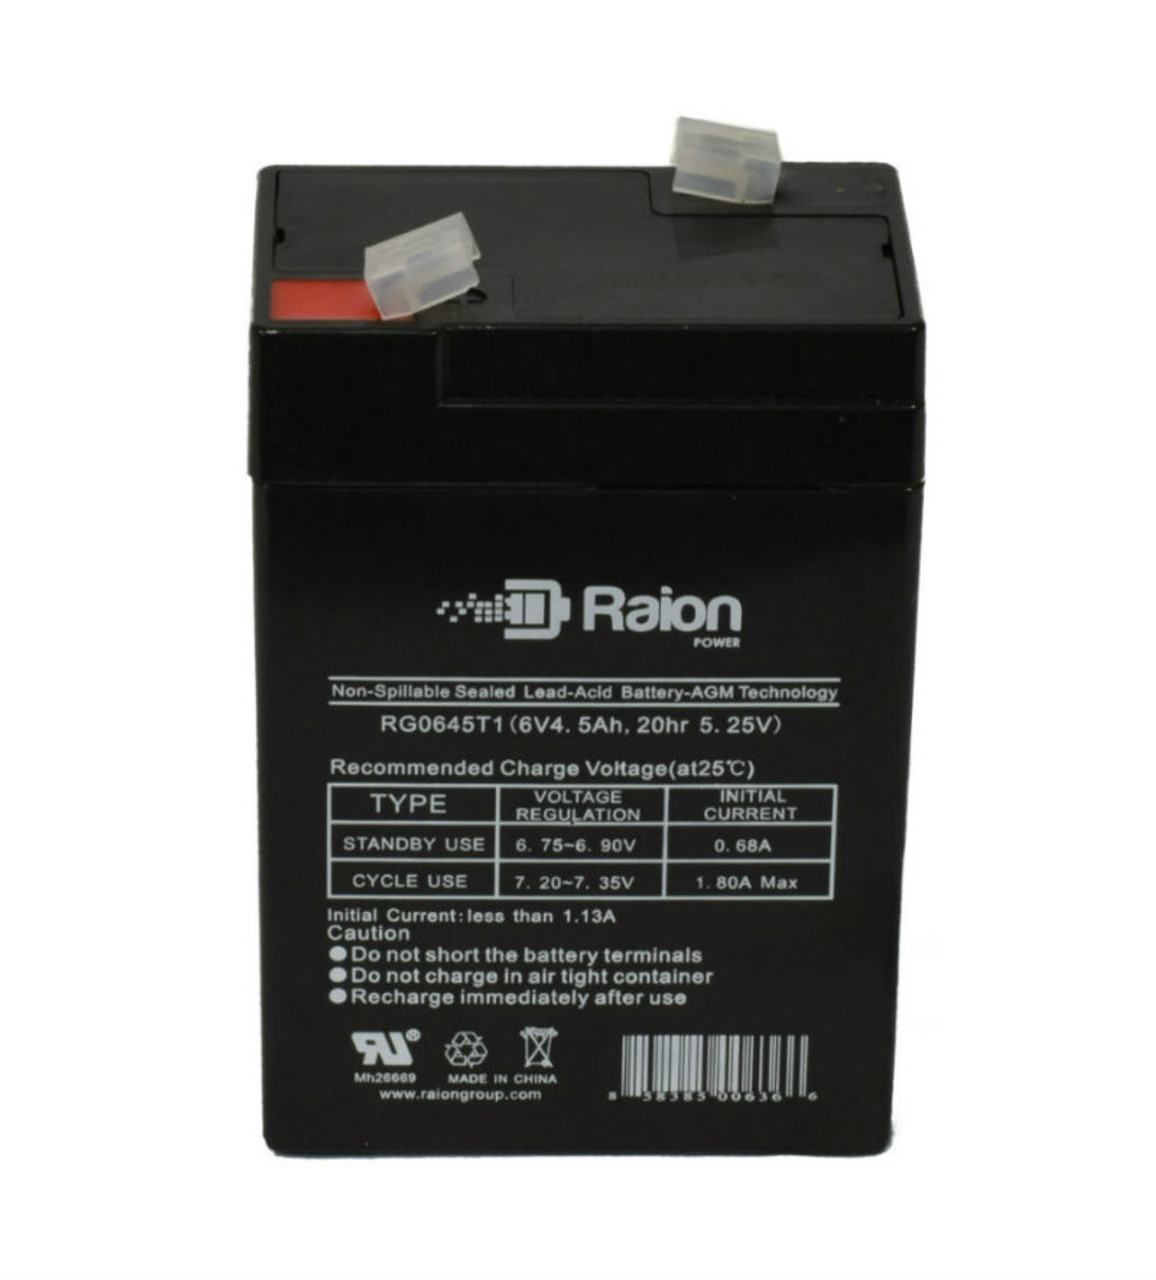 Raion Power RG0645T1 Replacement Battery Cartridge for Vision CP650